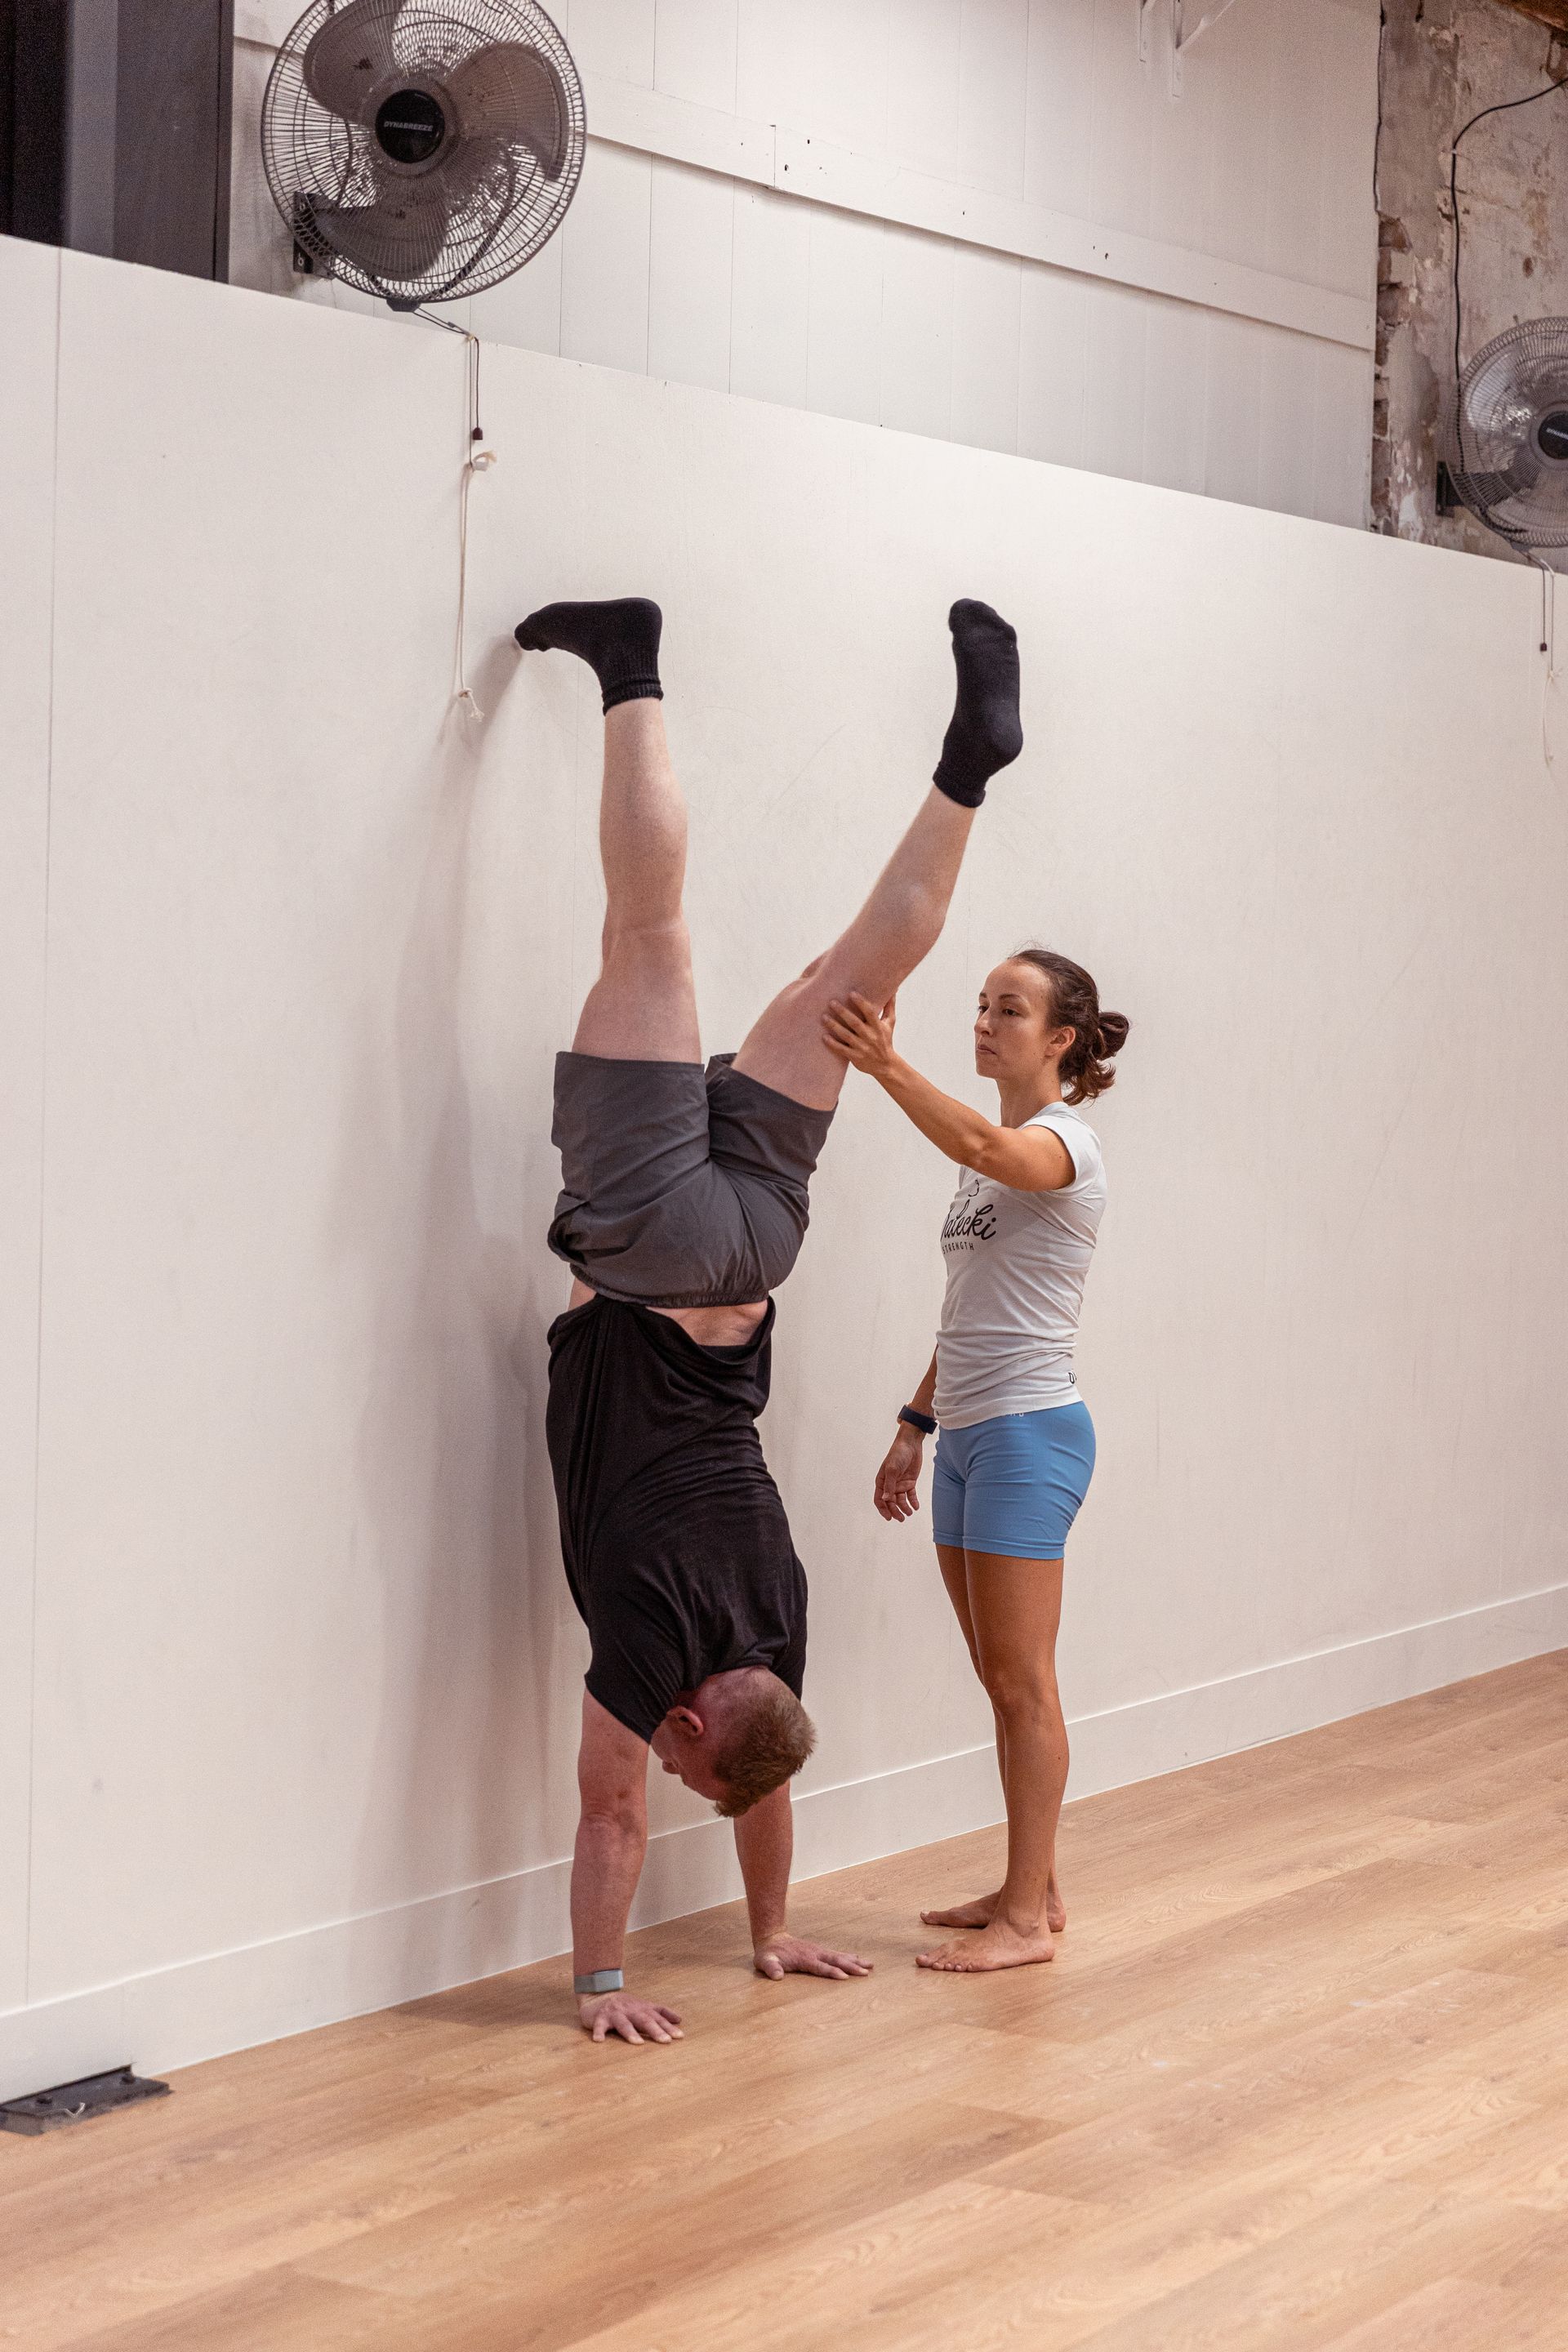 Image of a girl helping a guy to do a handstand